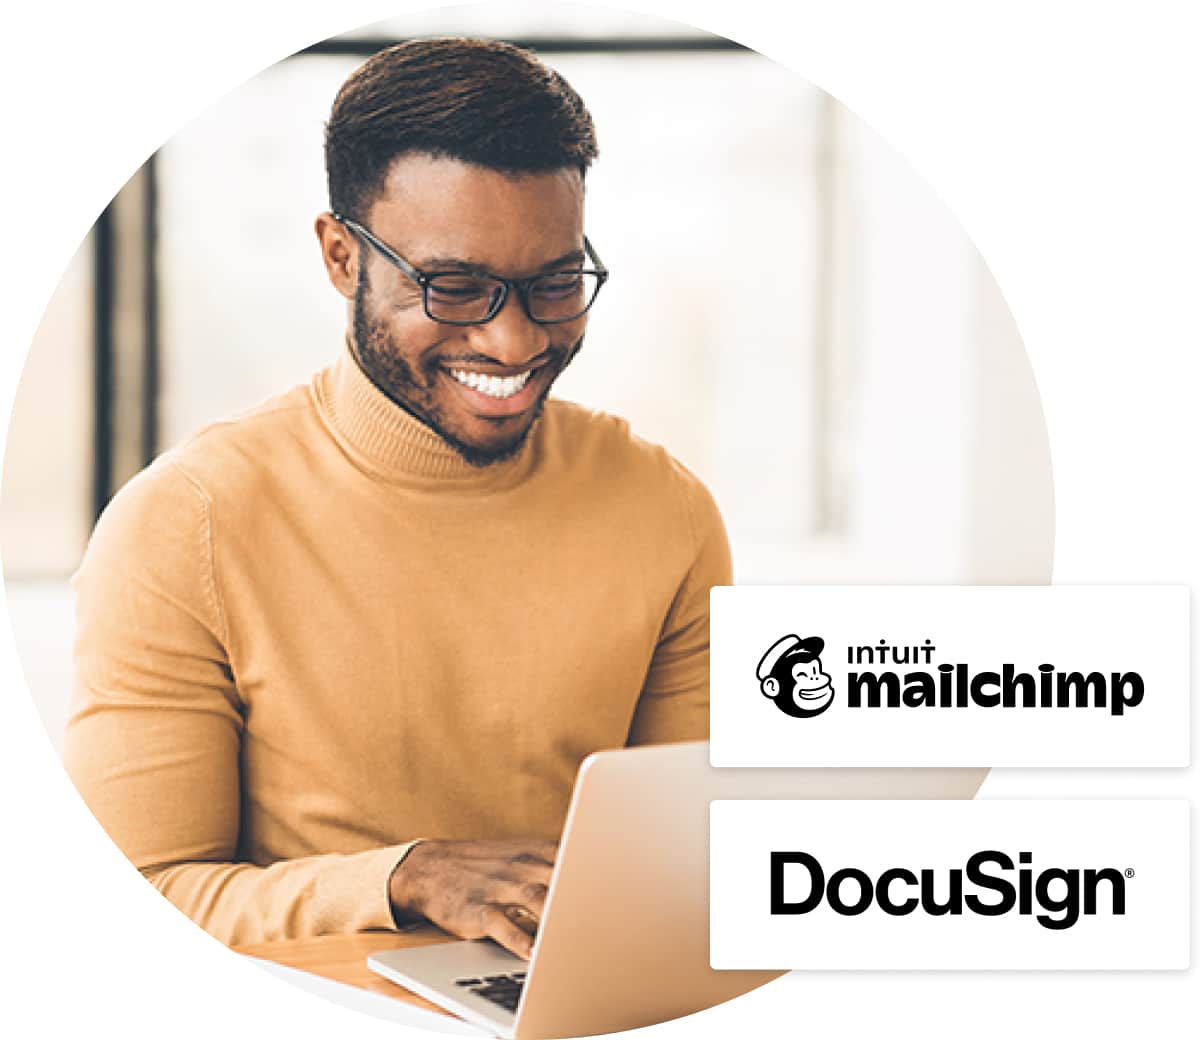 Smiling man in beige turtleneck typing at laptop, Docusign and Mailchimp logos over top 